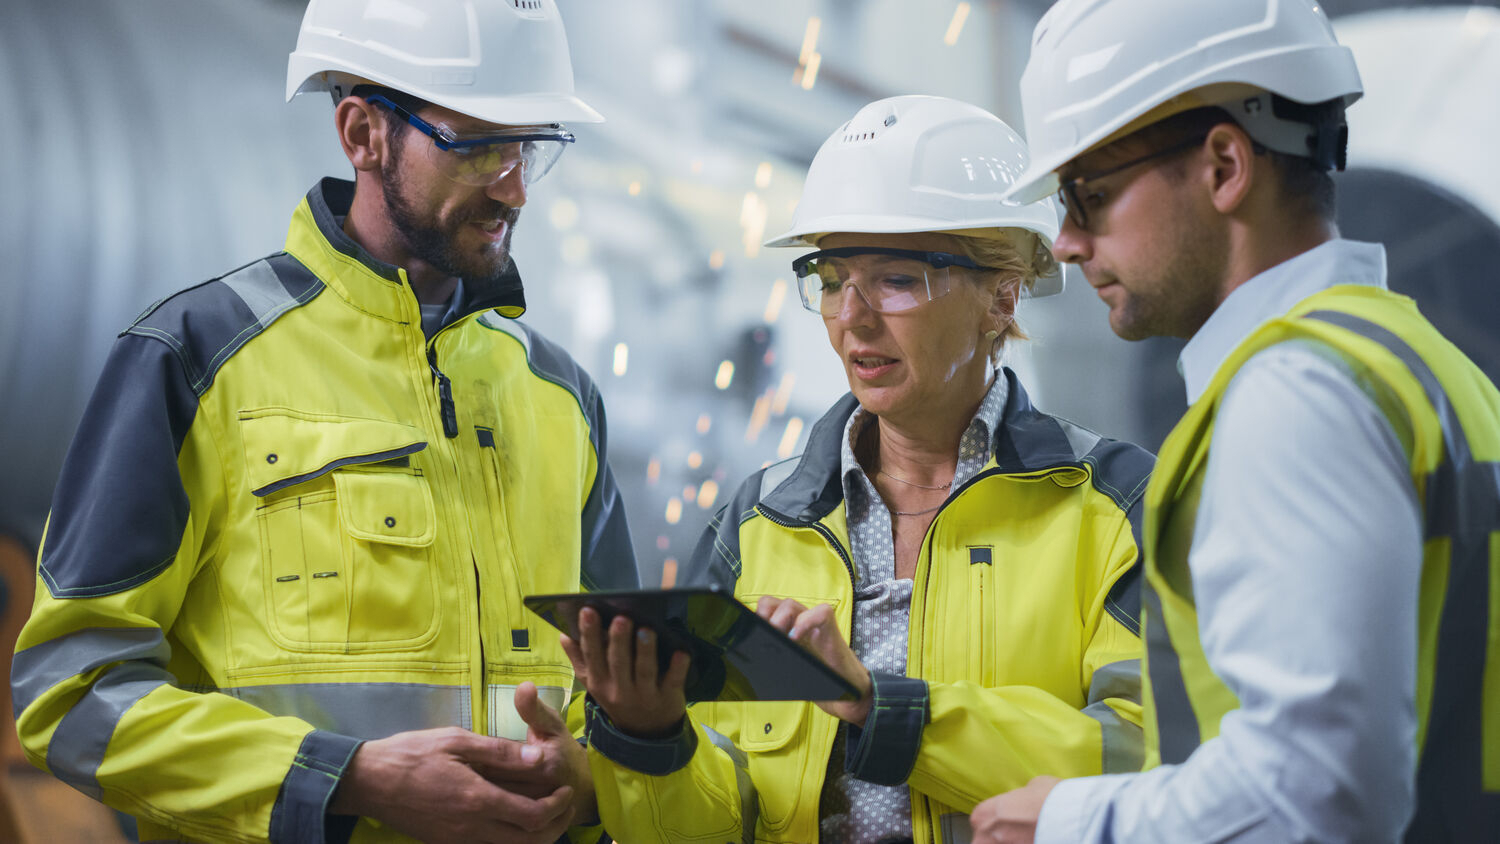 On Line Awareness: Reliability Basics for Manufacturing Leaders